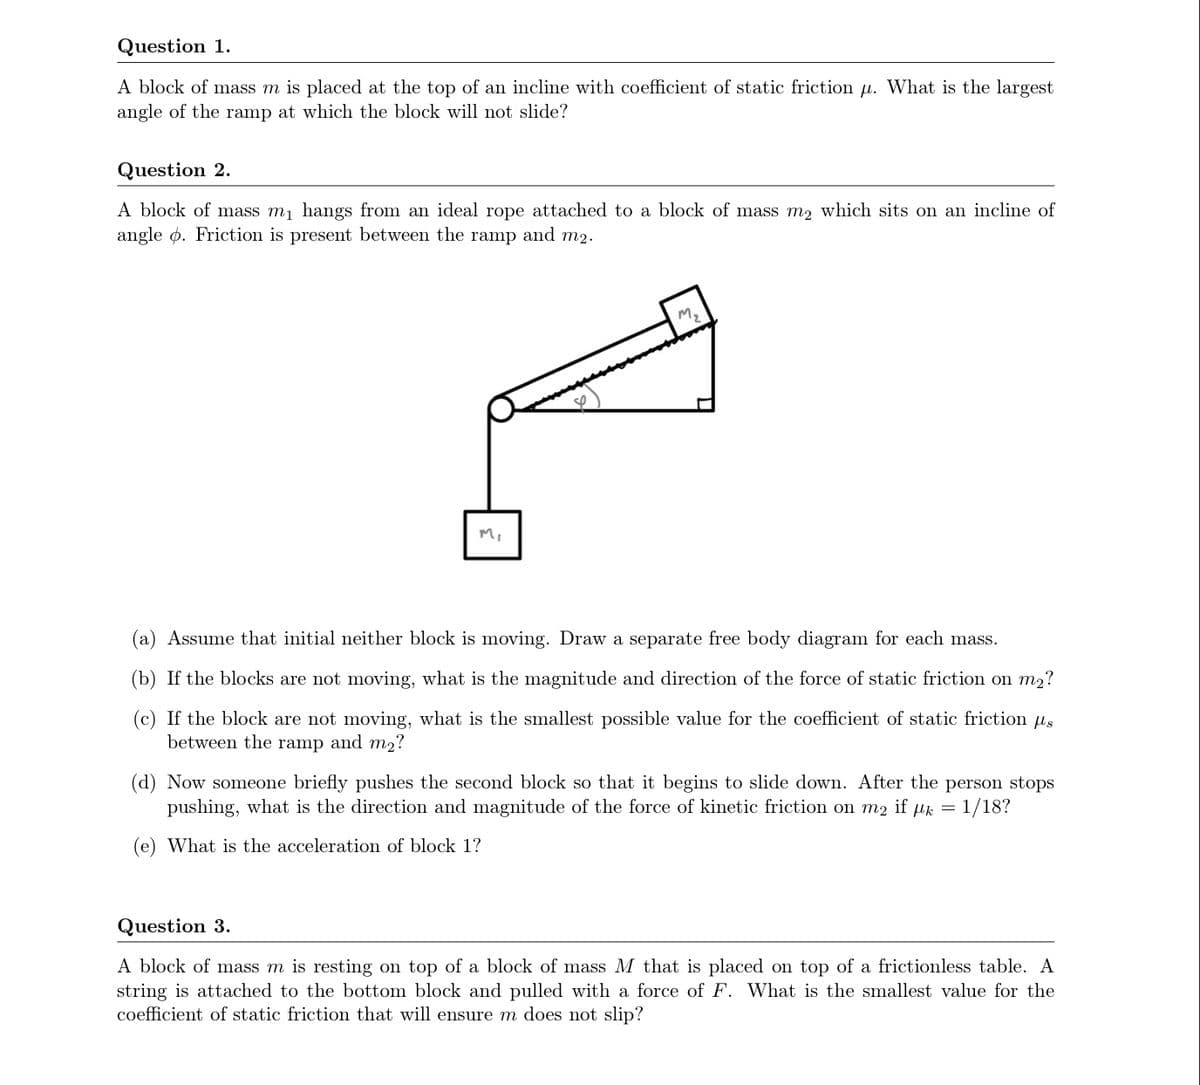 Question 1.
A block of mass m is placed at the top of an incline with coefficient of static friction µ. What is the largest
angle of the ramp at which the block will not slide?
Question 2.
A block of mass mj hangs from an ideal rope attached to a block of mass m2 which sits on an incline of
angle ø. Friction is present between the ramp and m2.
M.
Mi
(a) Assume that initial neither block is moving. Draw a separate free body diagram for each mass.
(b) If the blocks are not moving, what is the magnitude and direction of the force of static friction on m2?
(c) If the block are not moving, what is the smallest possible value for the coefficient of static friction us
between the ramp and m2?
(d) Now someone briefly pushes the second block so that it begins to slide down. After the person stops
pushing, what is the direction and magnitude of the force of kinetic friction on m2 if µk = 1/18?
(e) What is the acceleration of block 1?
Question 3.
A block of mass m is resting on top of a block of mass M that is placed on top of a frictionless table. A
string is attached to the bottom block and pulled with a force of F. What is the smallest value for the
coefficient of static friction that will ensure m does not slip?
